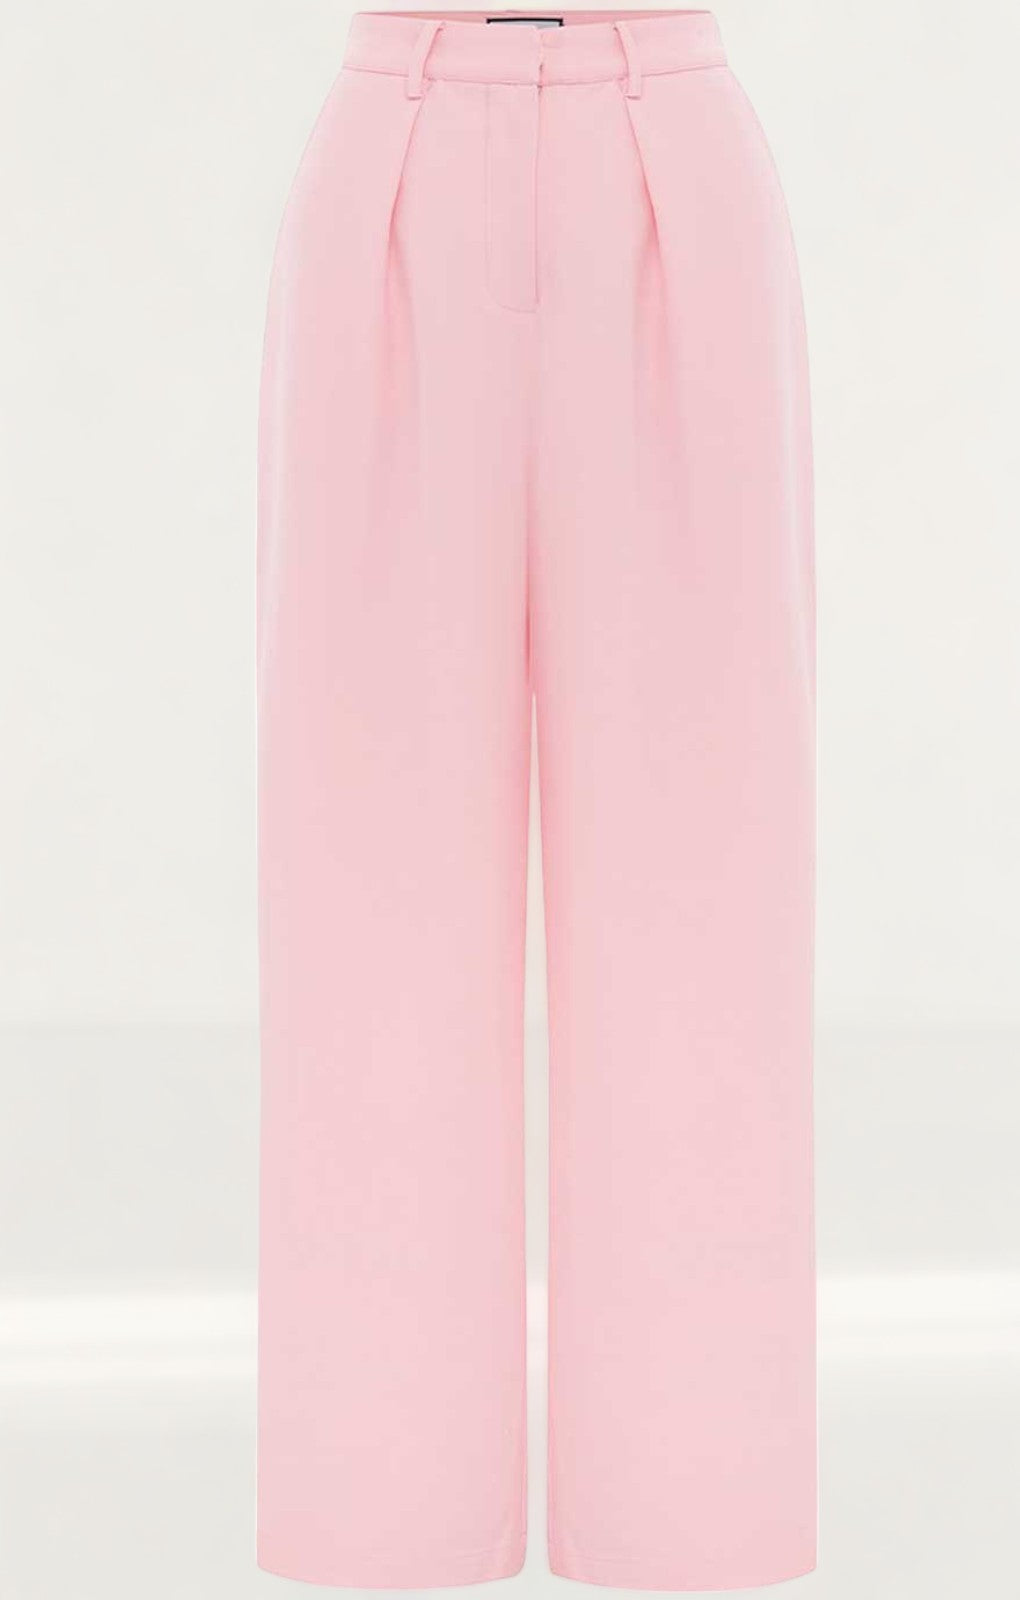 Runaway The Label Pink Francesca Co-Ord product image